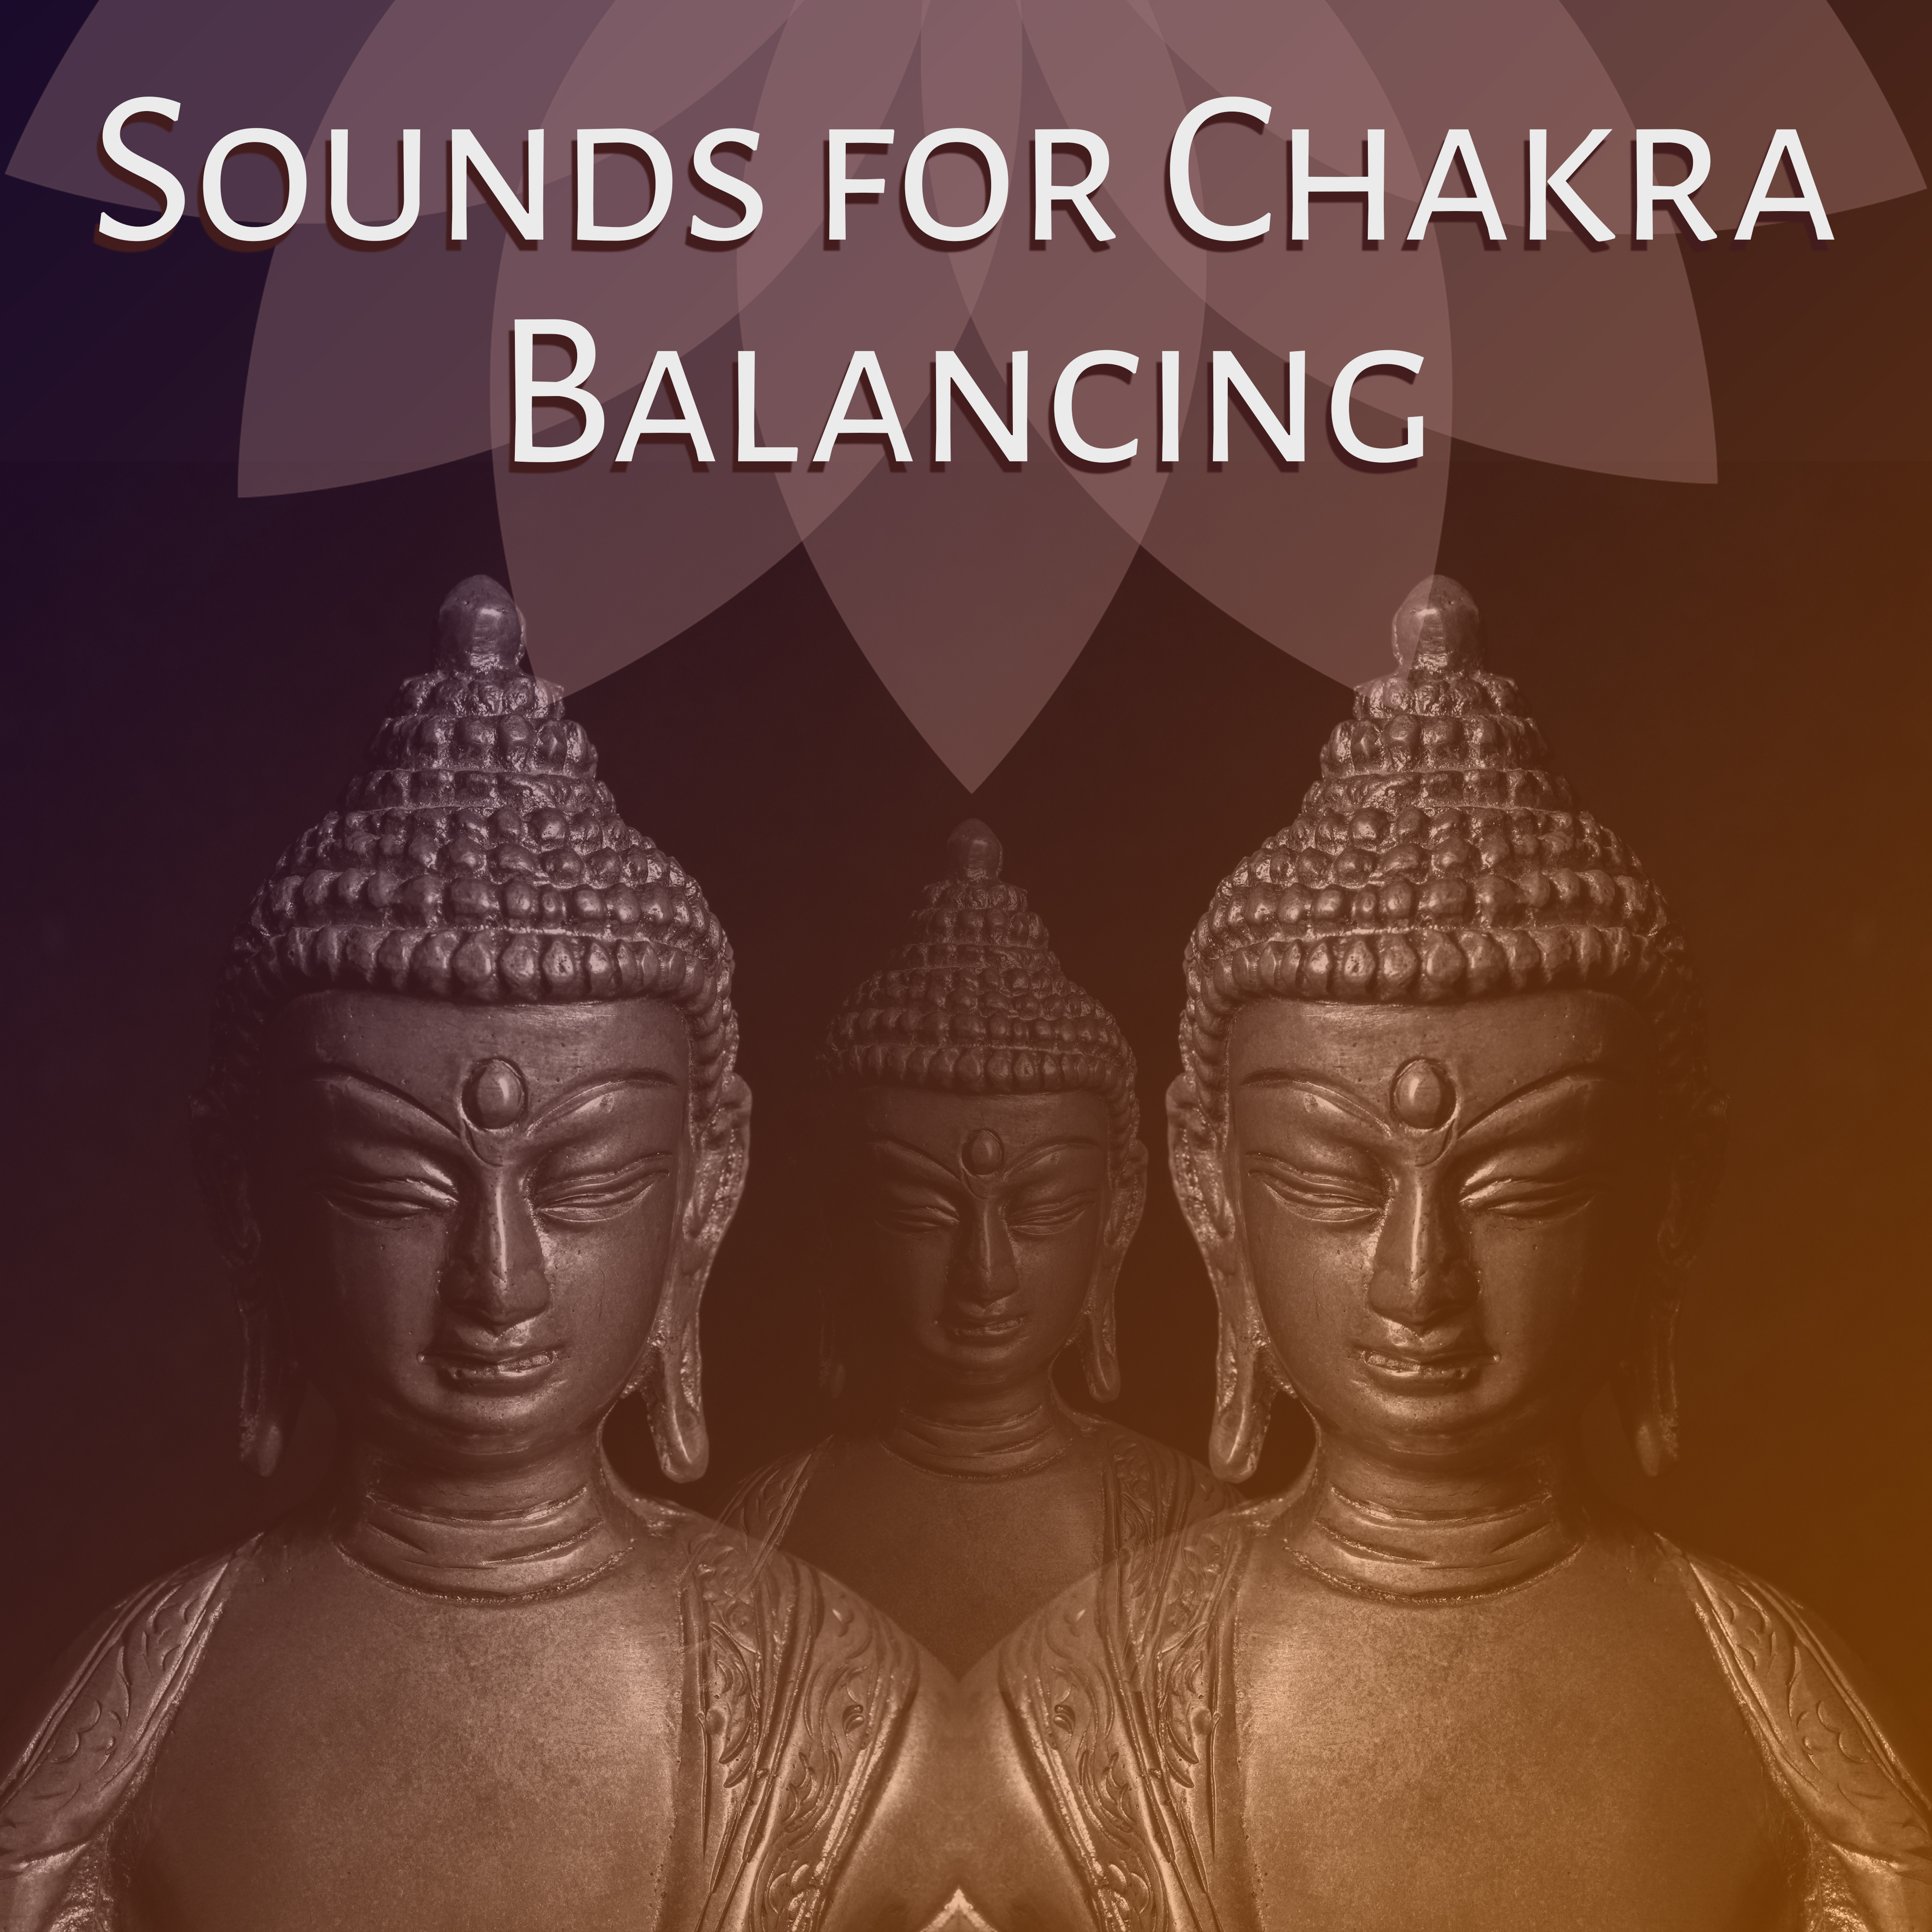 Sounds for Chakra Balancing – Meditation Sounds for Spirit Calmness, Inner Peace, Mind Control, New Age, Buddha Lounge